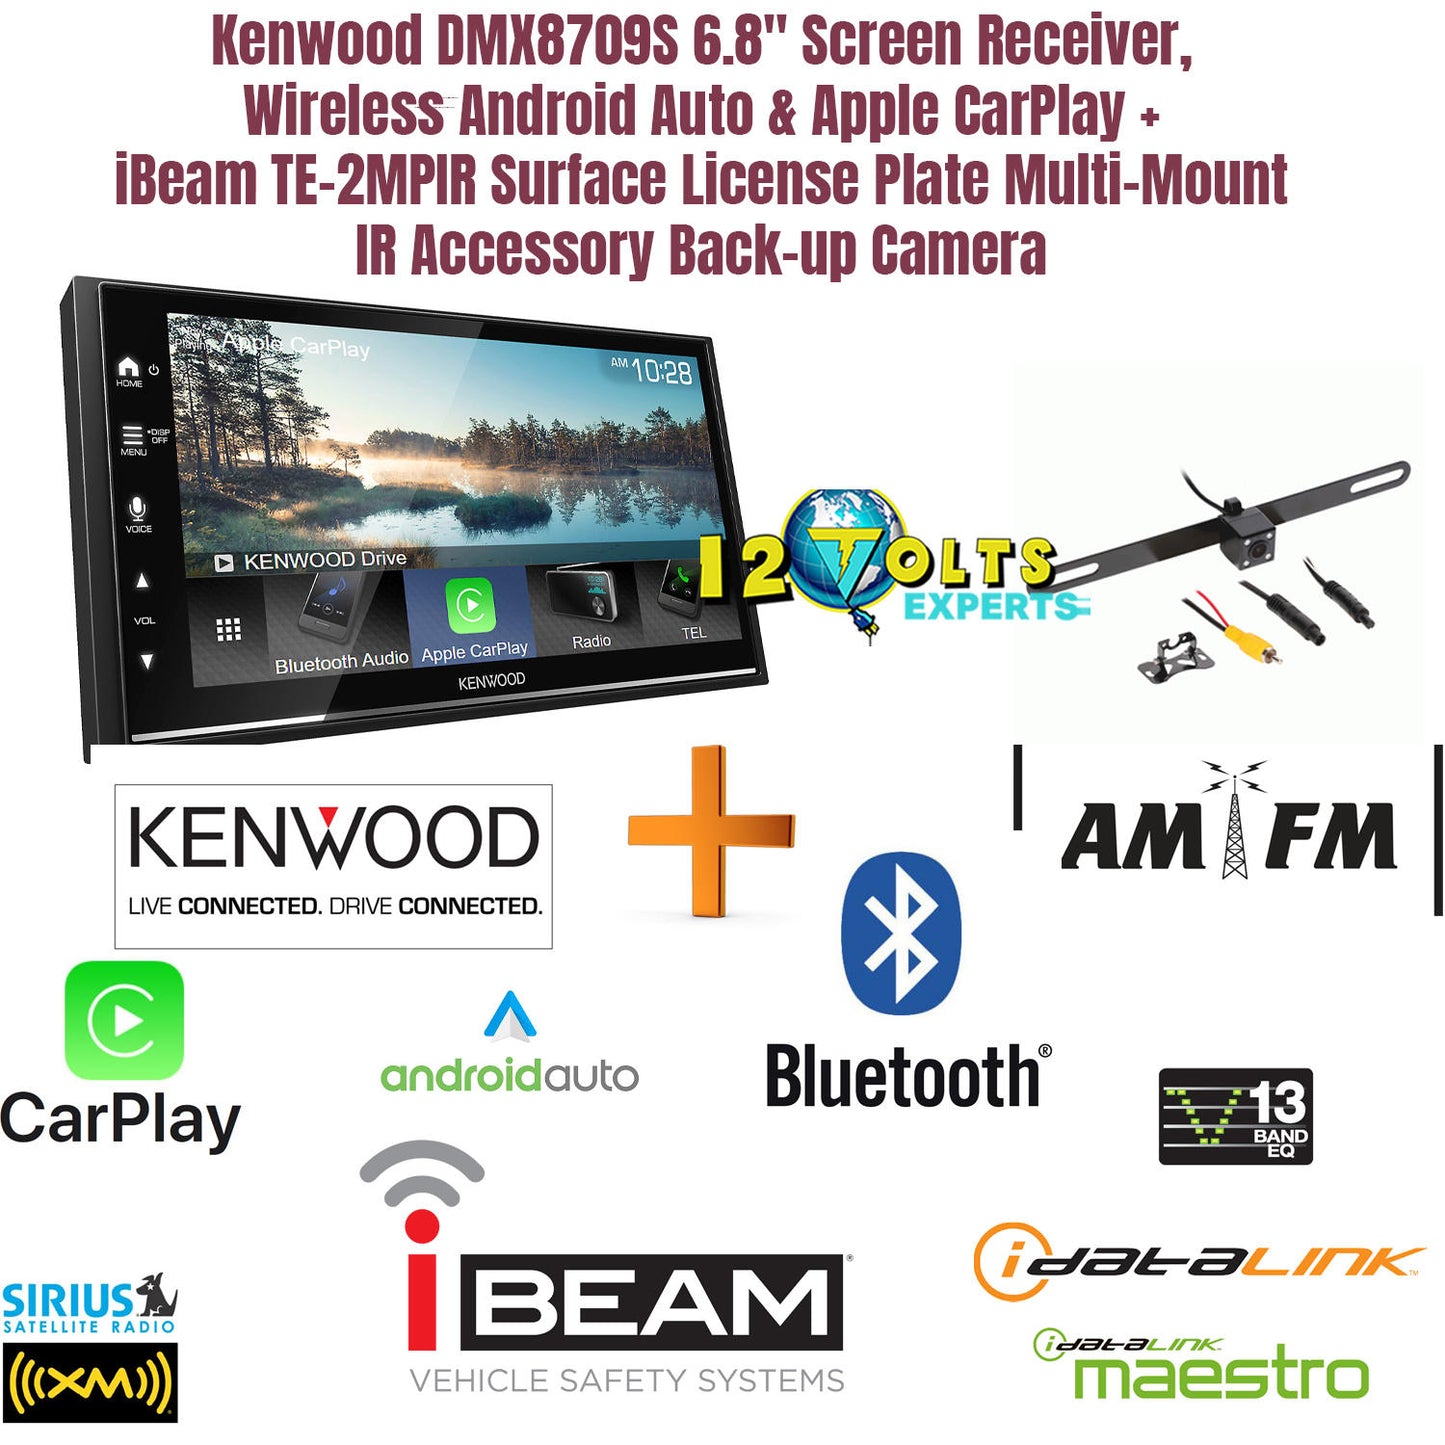 Kenwood DMX8709S 6.8" Screen Receiver,  Wireless Android Auto & Apple CarPlay + iBeam TE-2MPIR Surface License Plate Multi-Mount  IR Accessory Back-up Camera